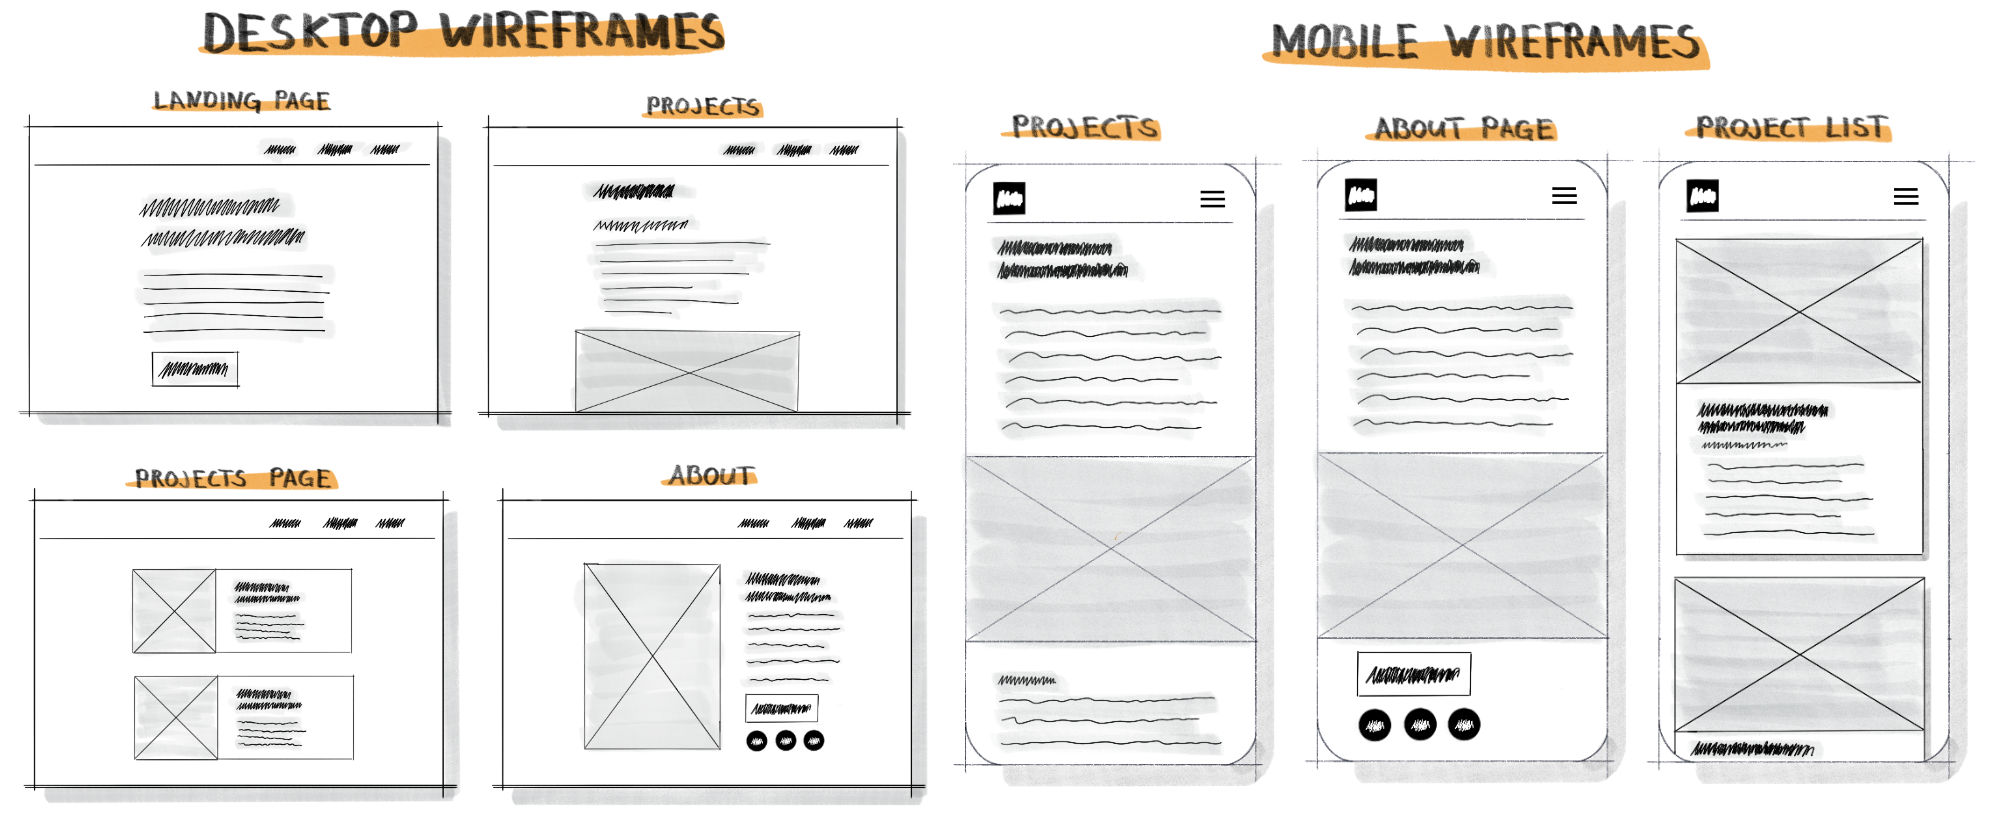 Low fidelity sketches of mobile and desktop wireframes.